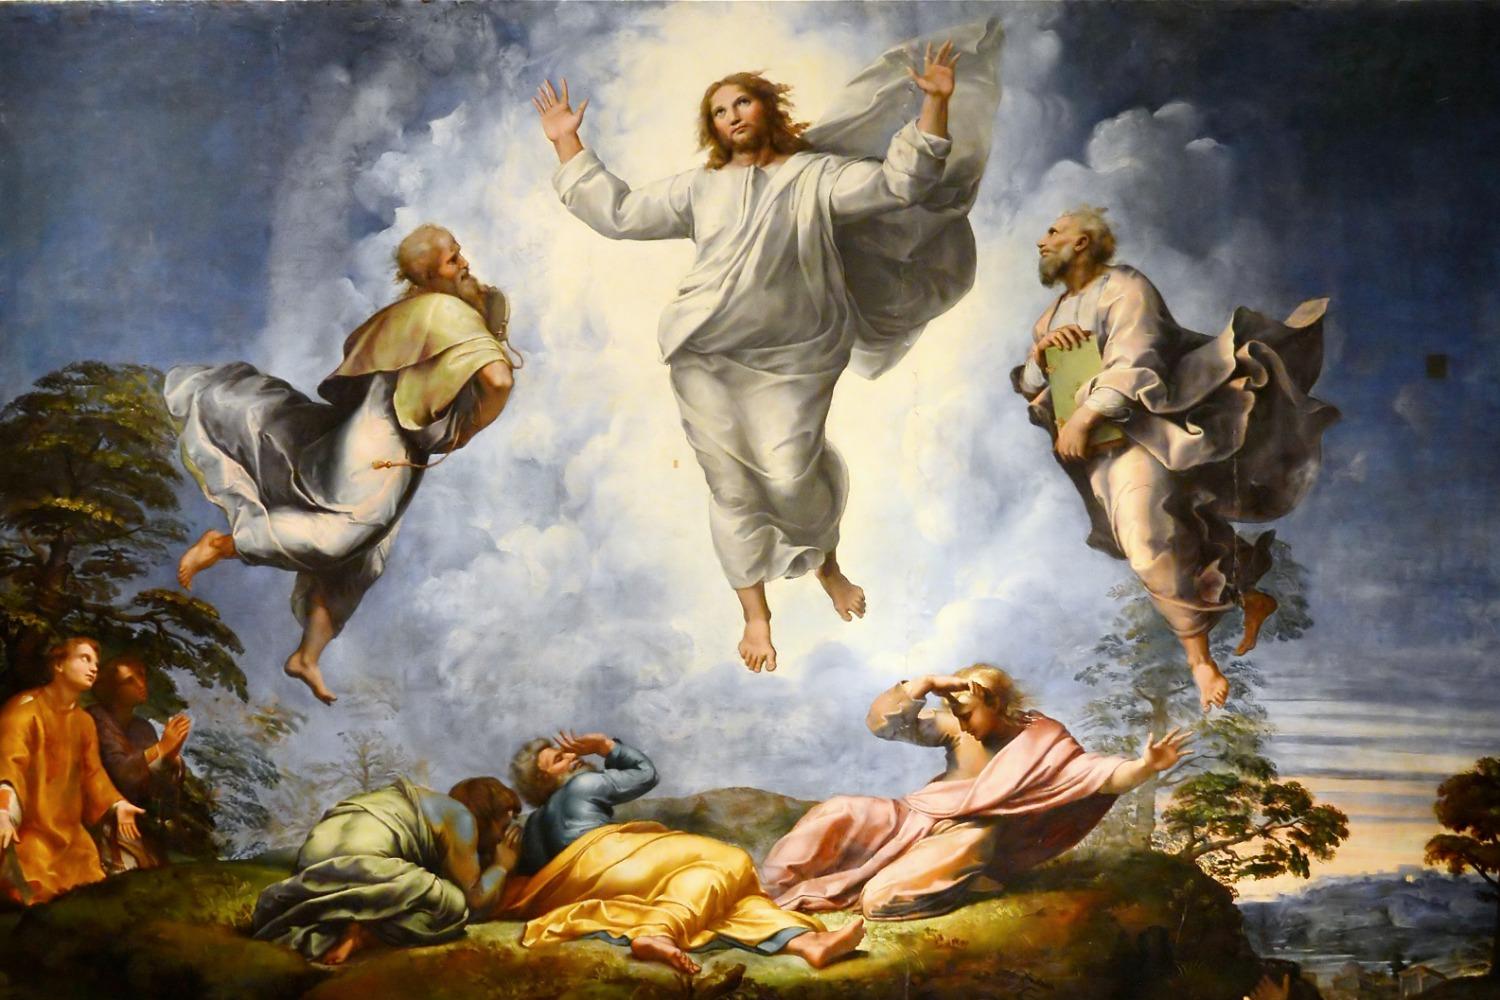 4. "The Transfiguration" by Raphael - wide 2